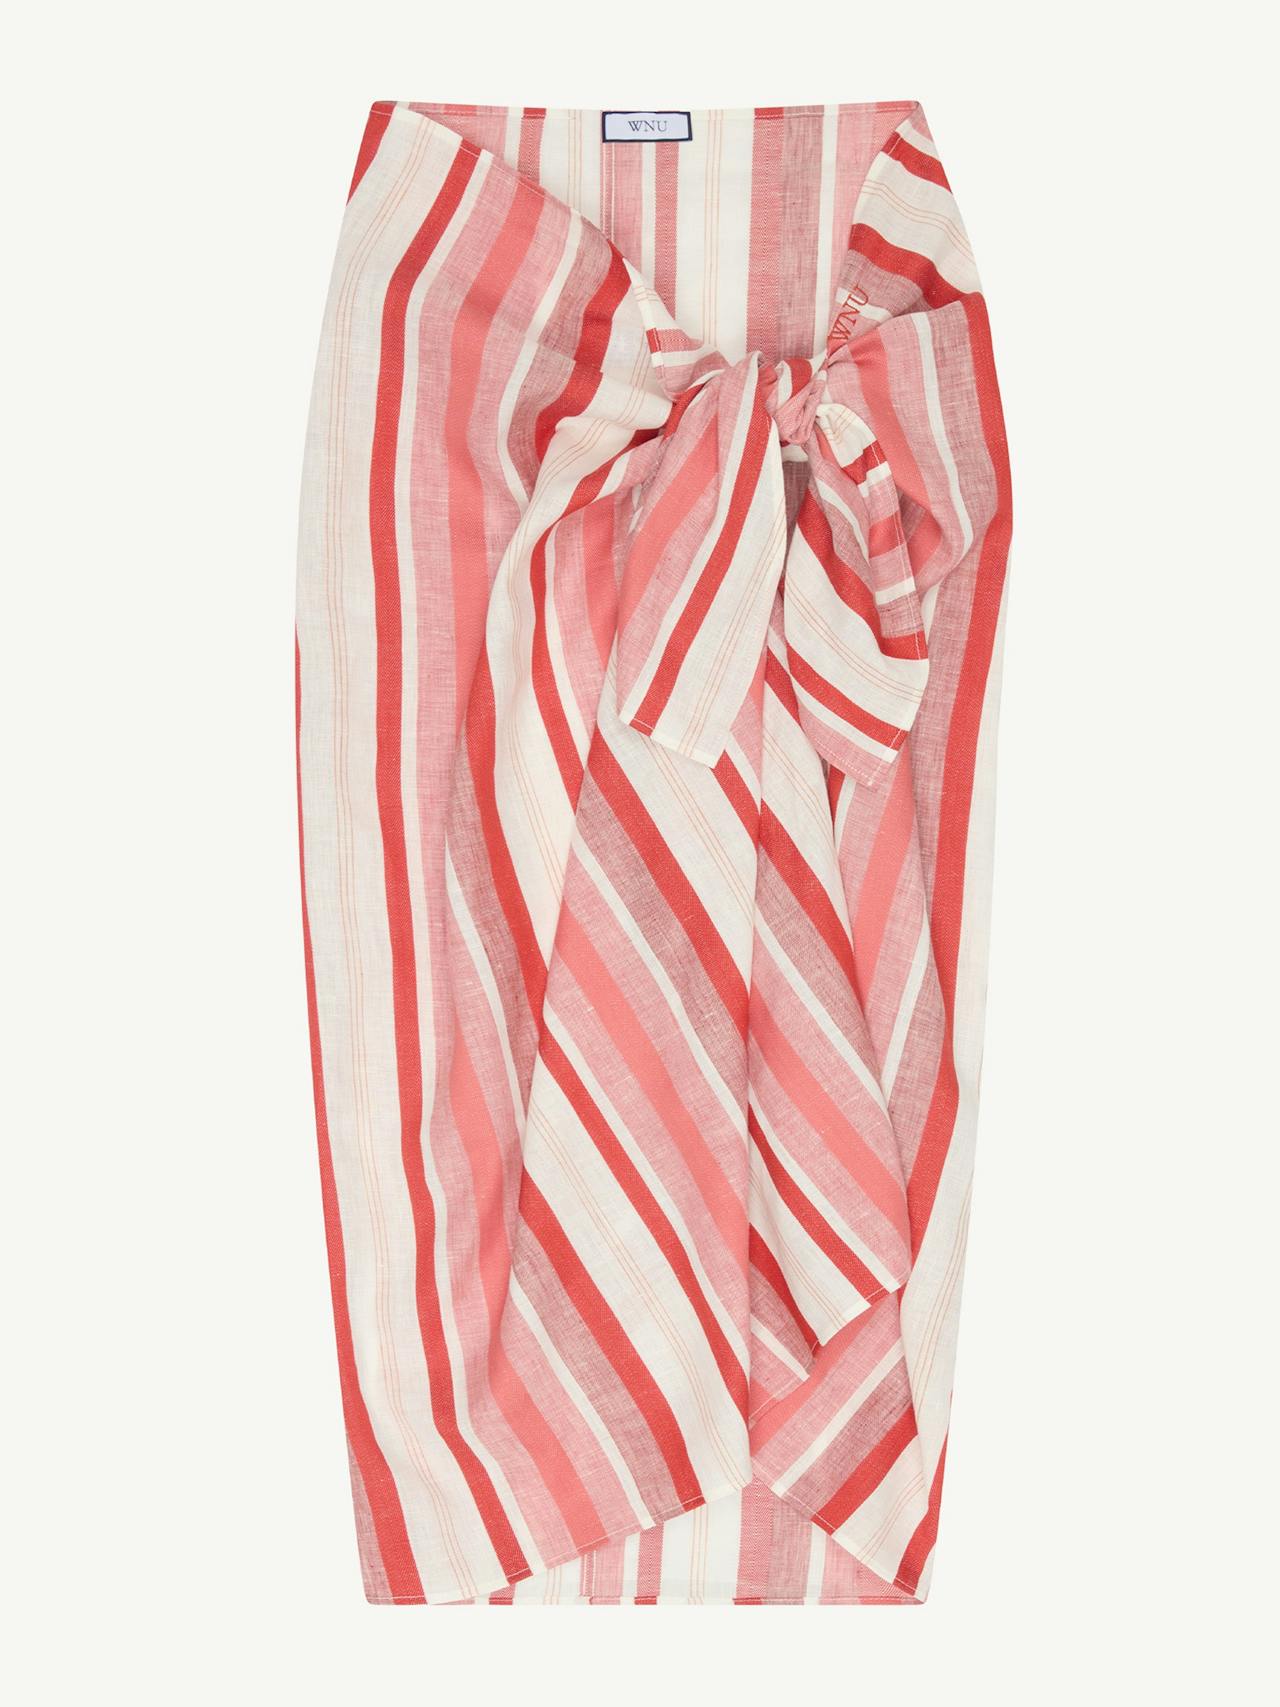 The sarong weave, red multistripe